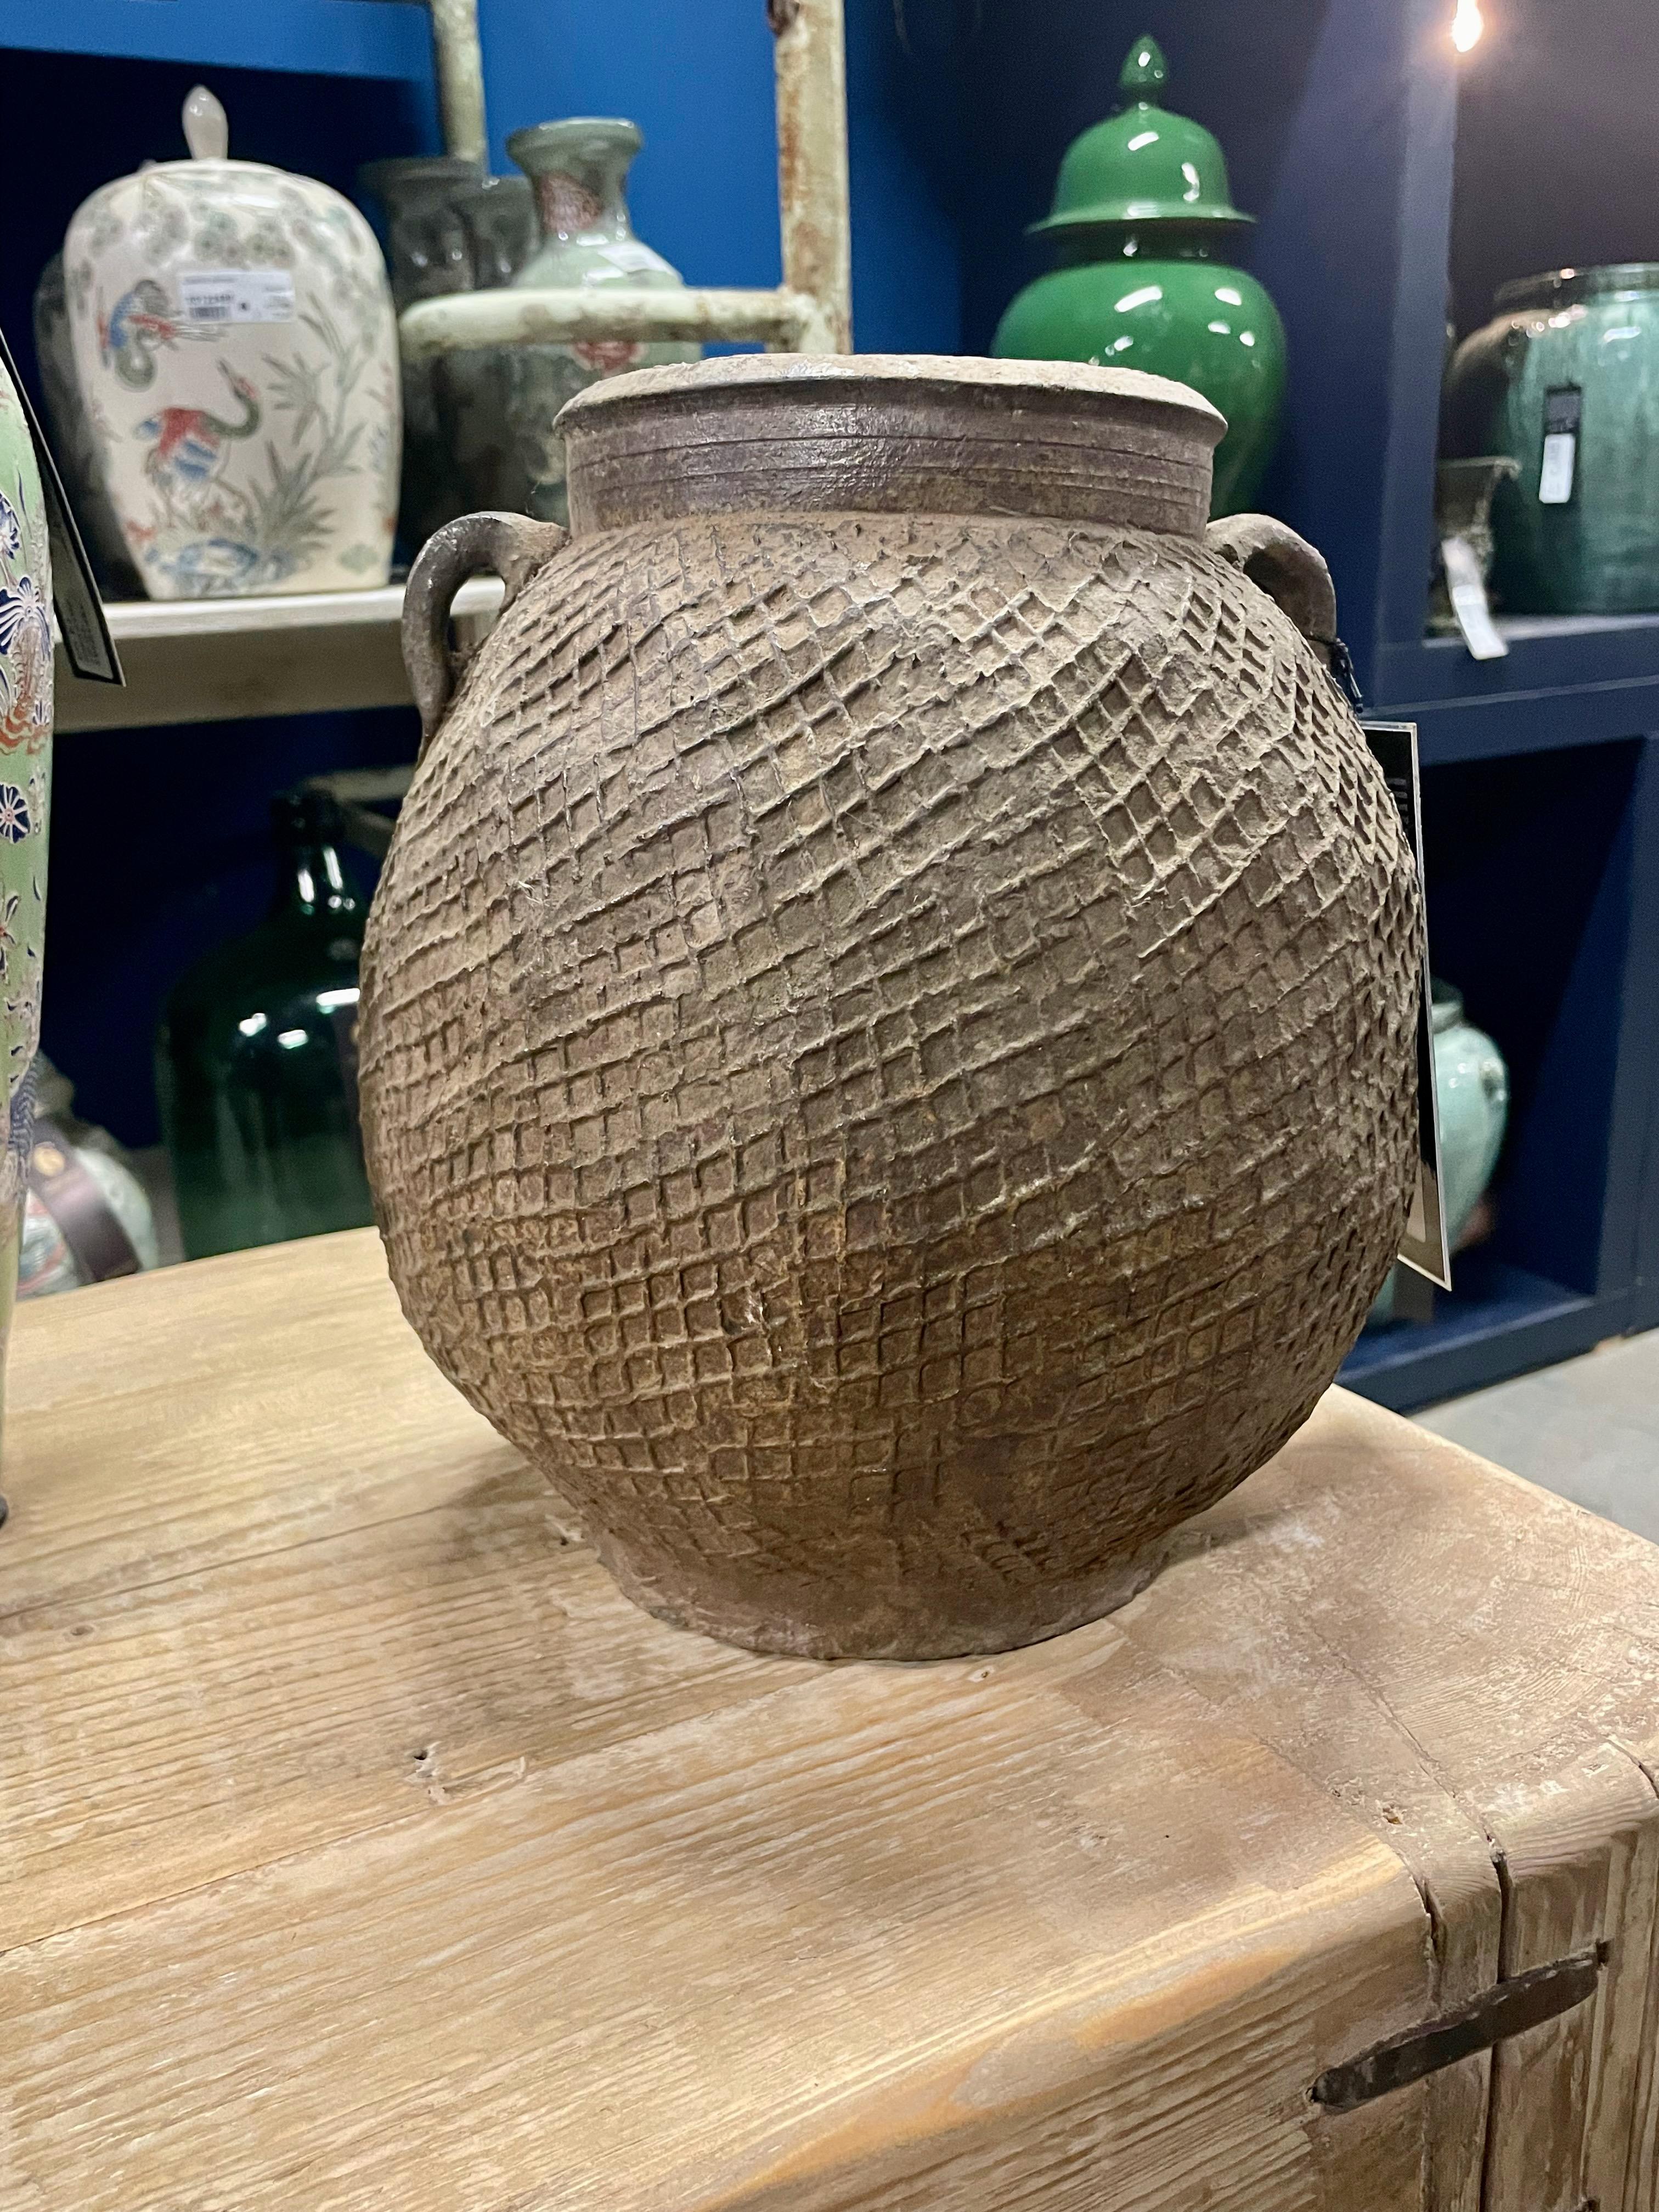 1940's Chinese stoneware vase with raised criss cross texture.
Two small handles.
Originally used to store grains.
Two available and sold individually.
